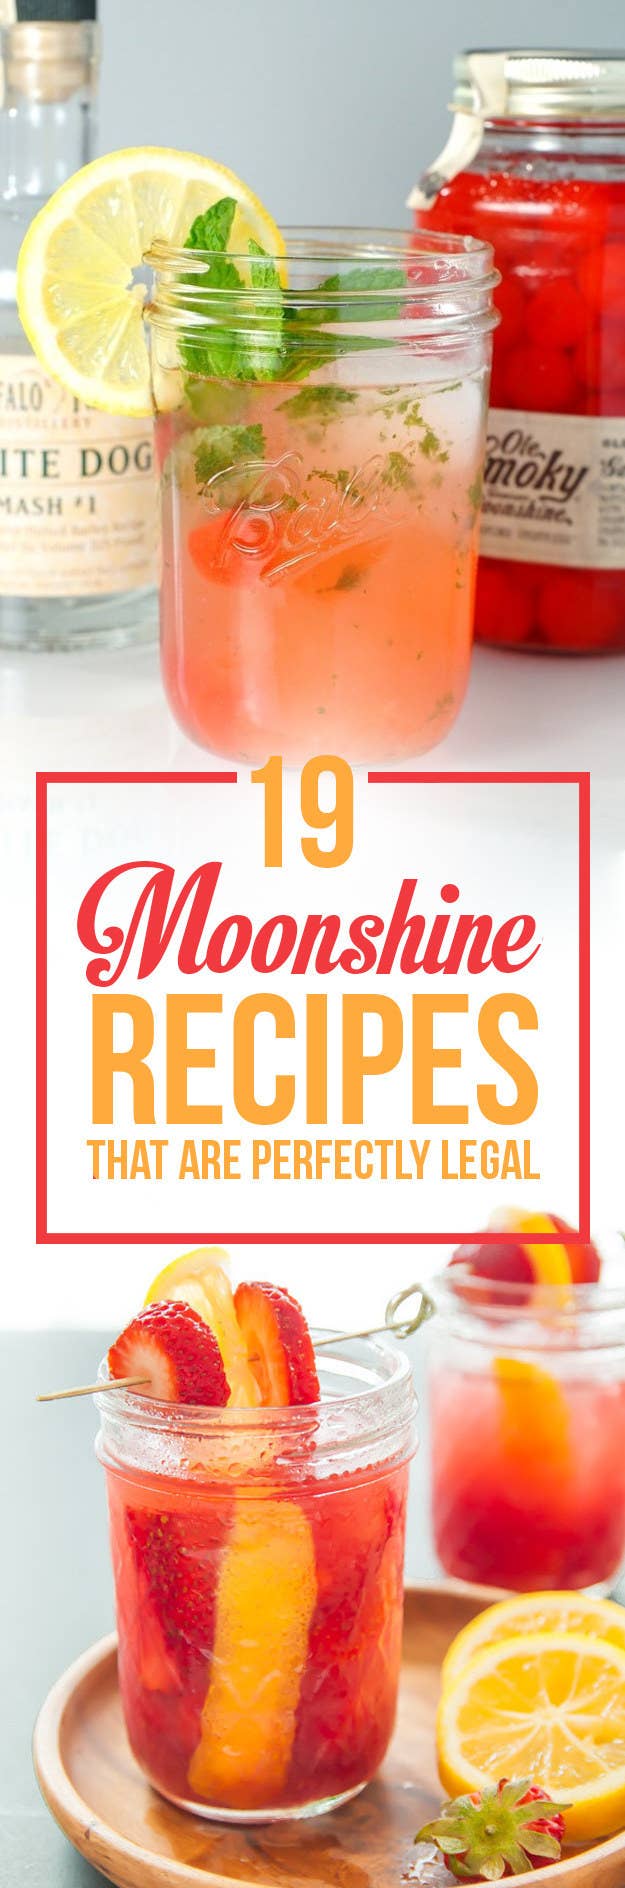 Moonshine Recipes That Are Perfectly Legal